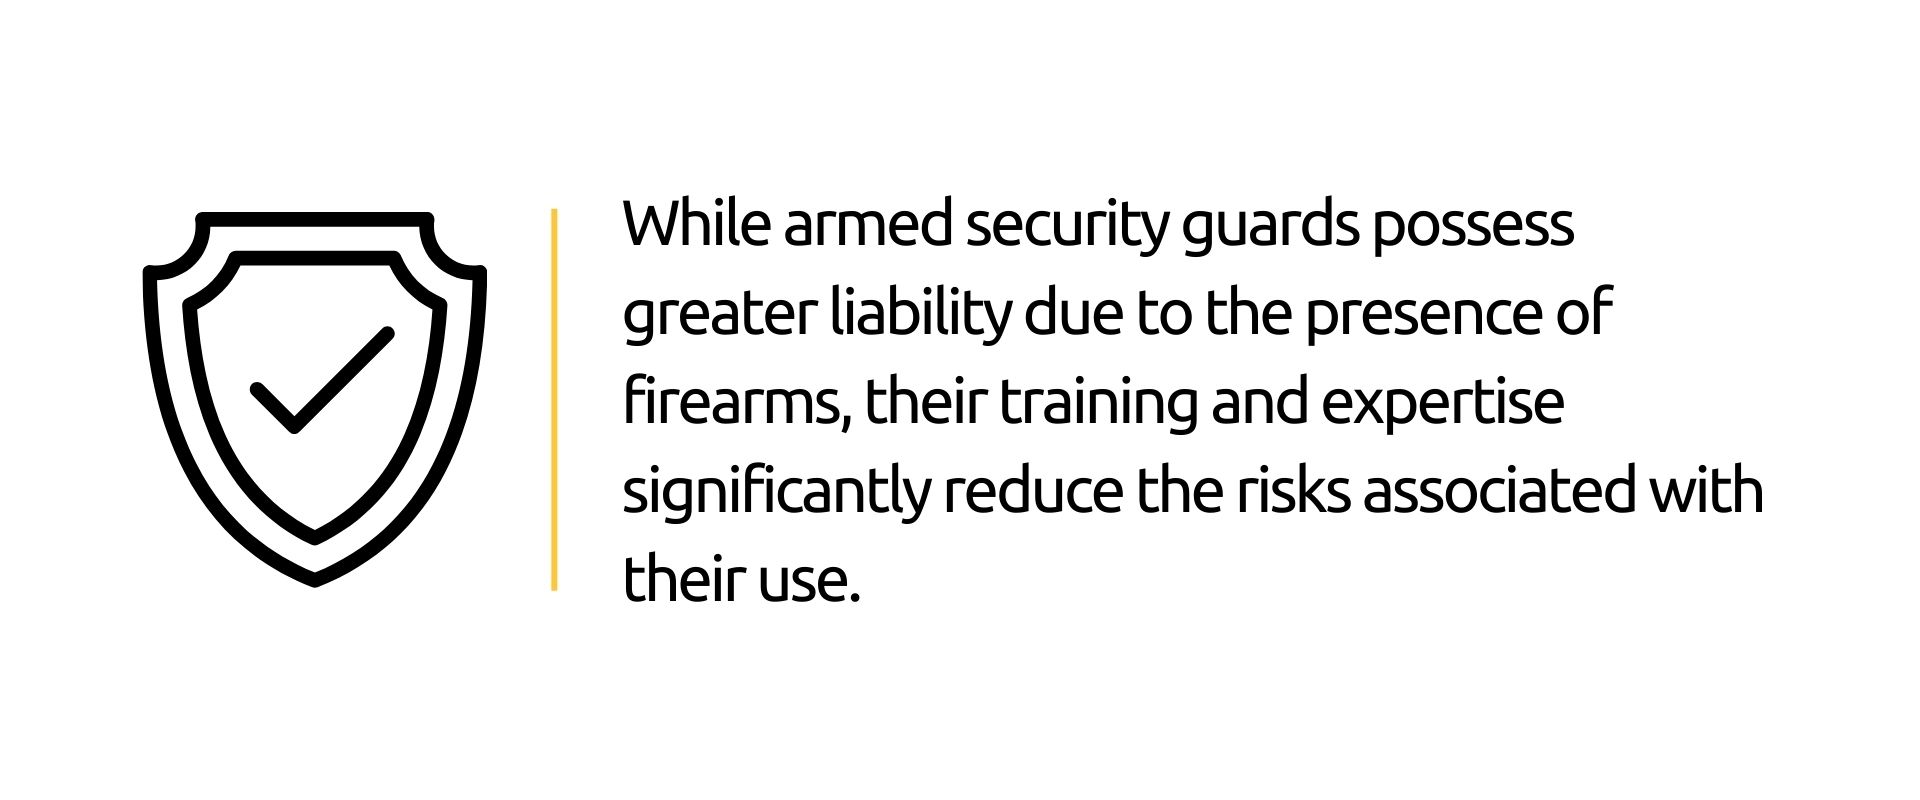 Armed security guards liability concerns